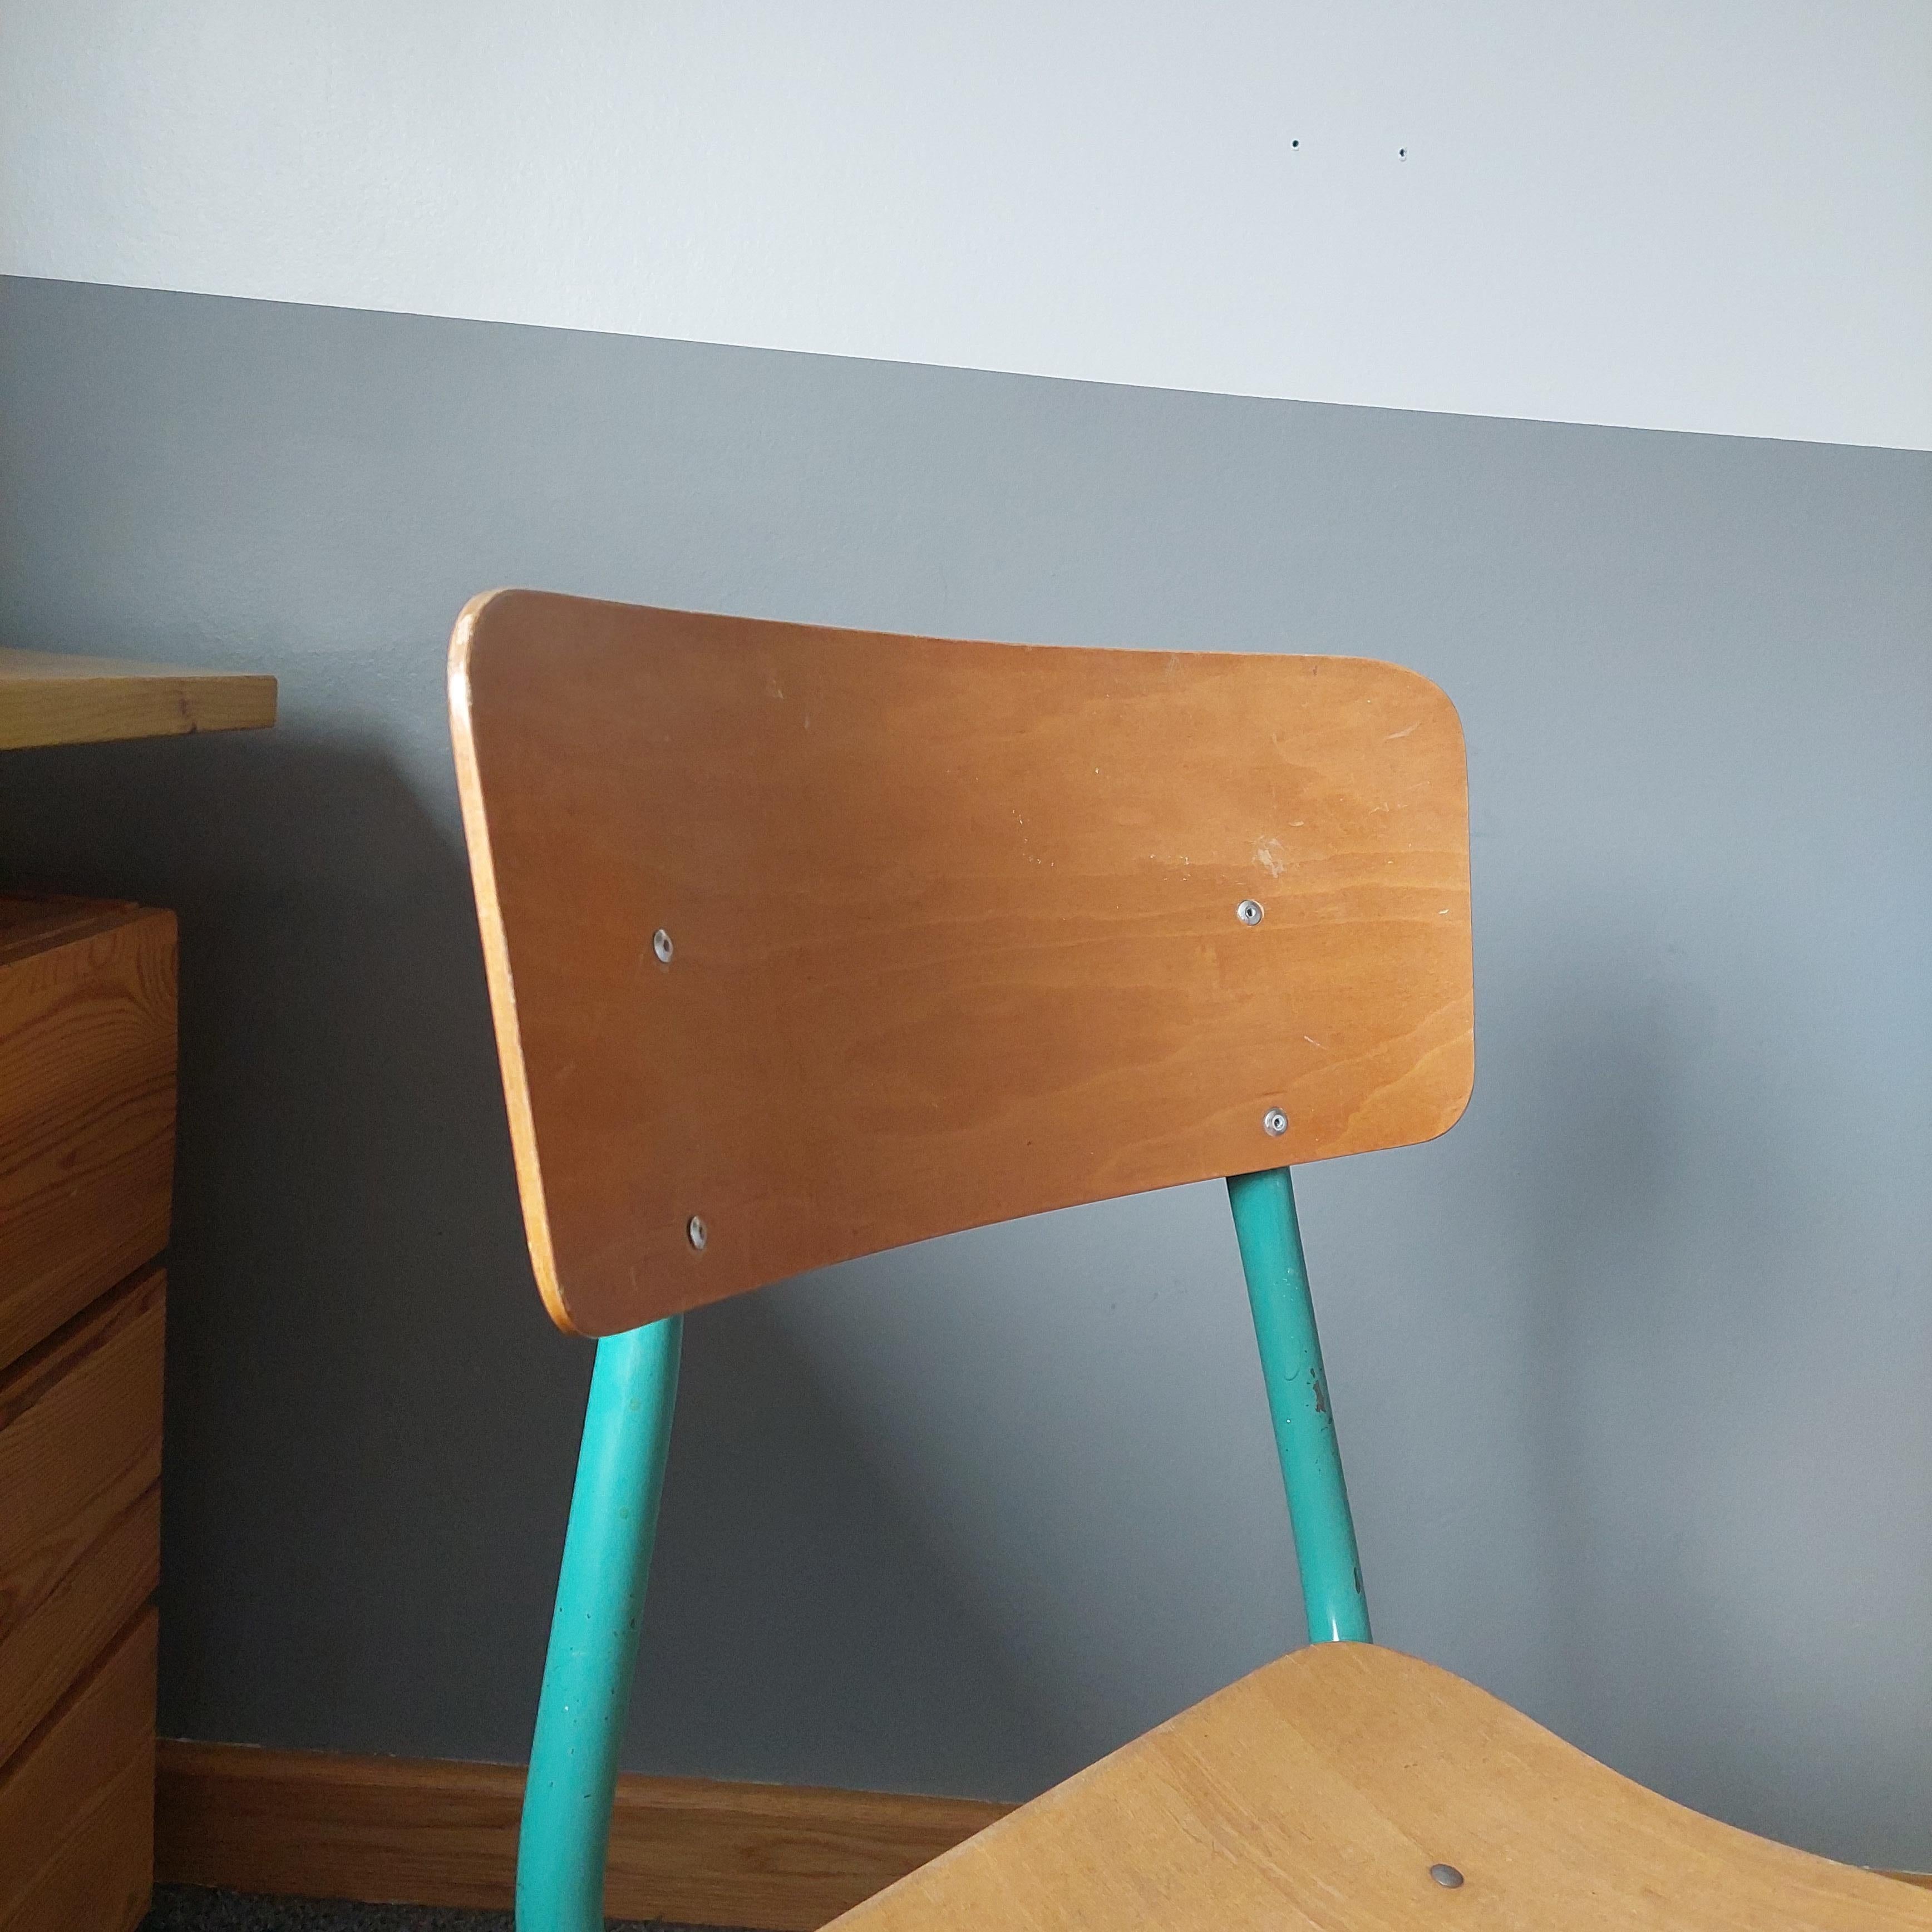 Midcentury 50s Industrial School Adult Size Chair Metal and Plywood Vintage Ret 4